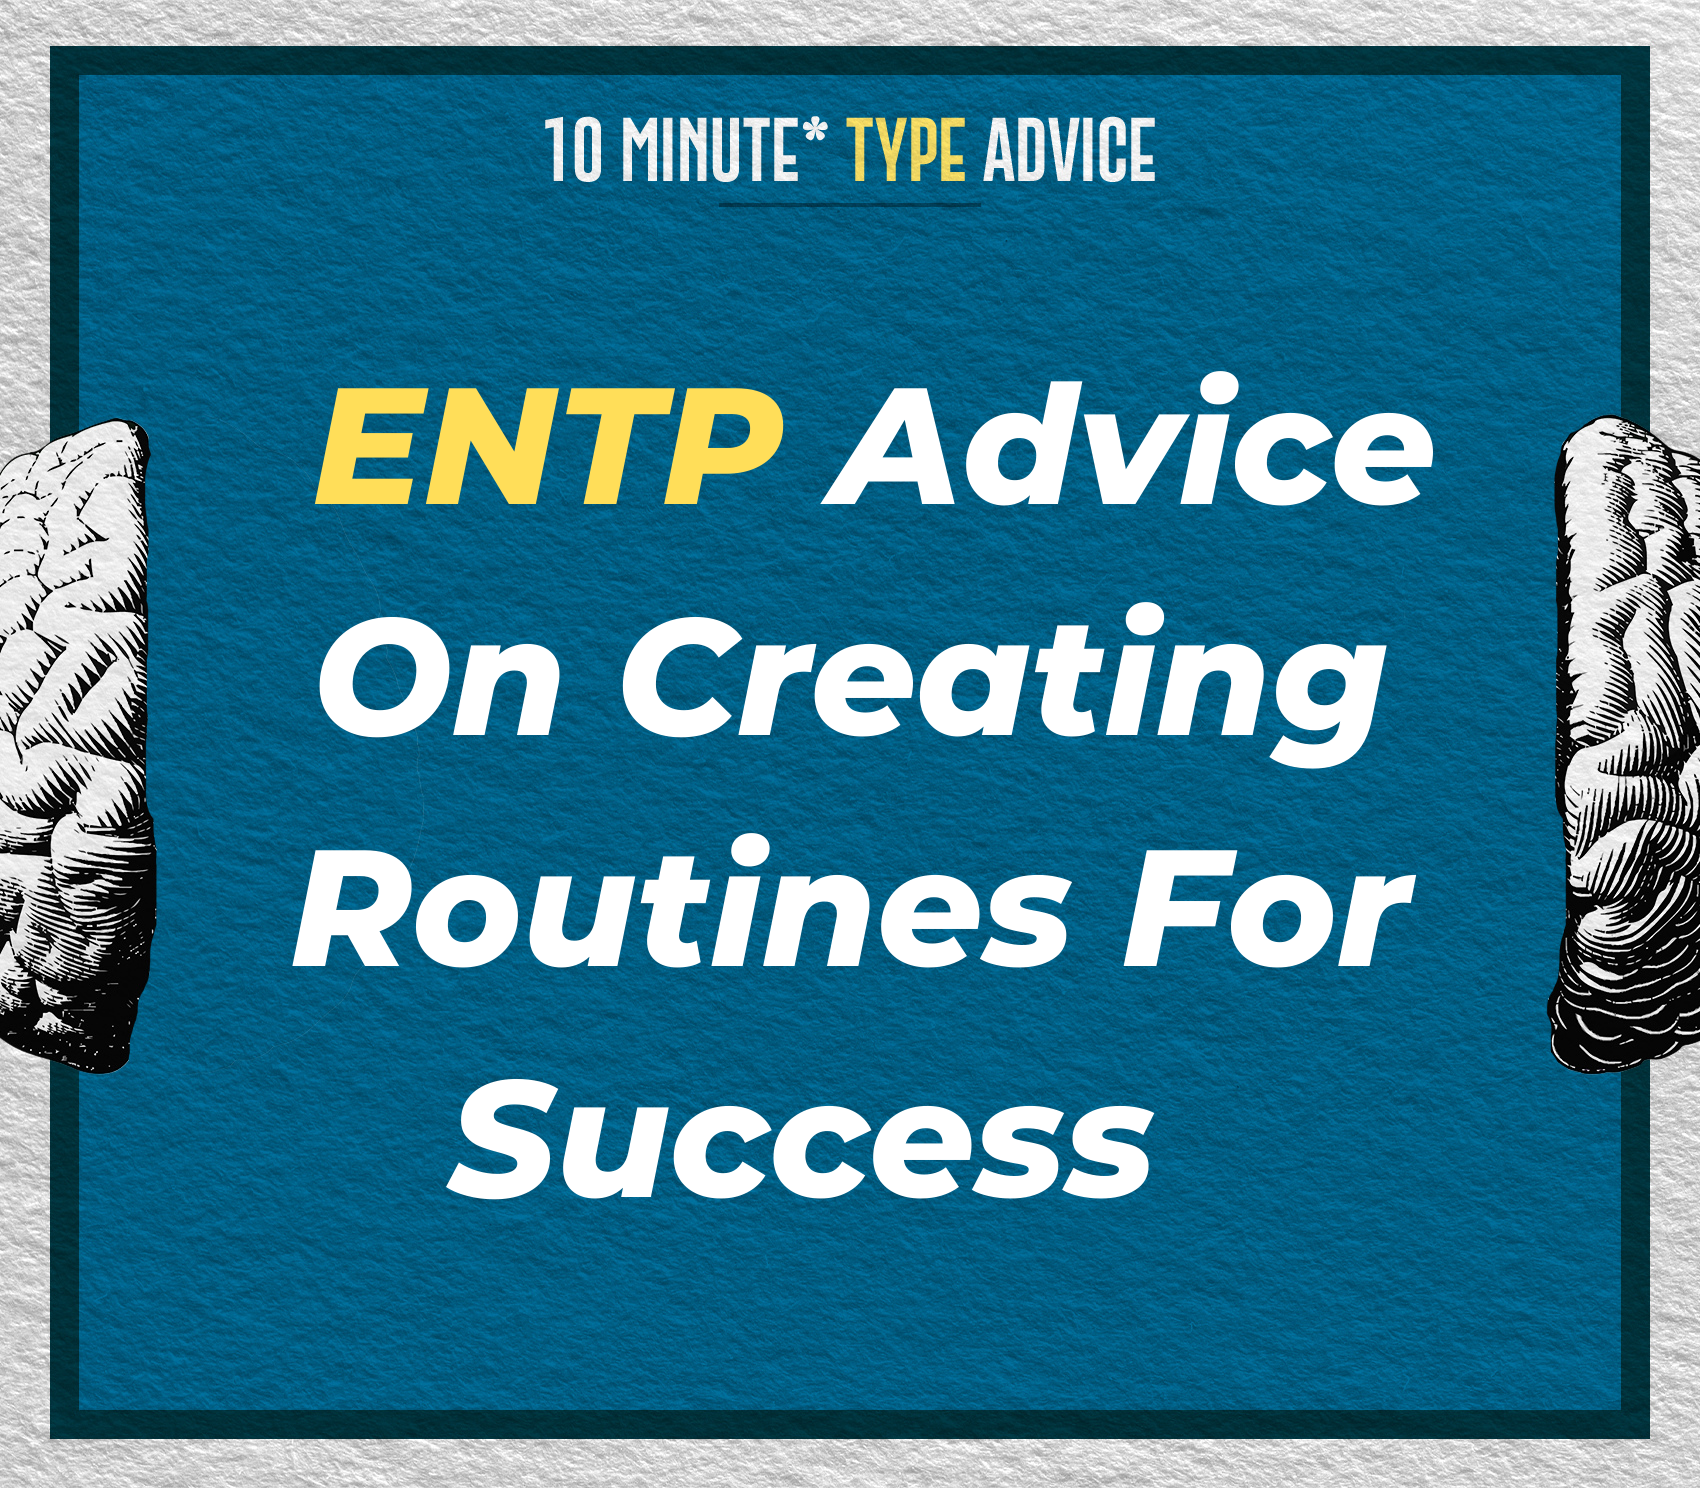 ENTP Advice On Creating Routines For Success | 10 Min Type Advice | S01:E09